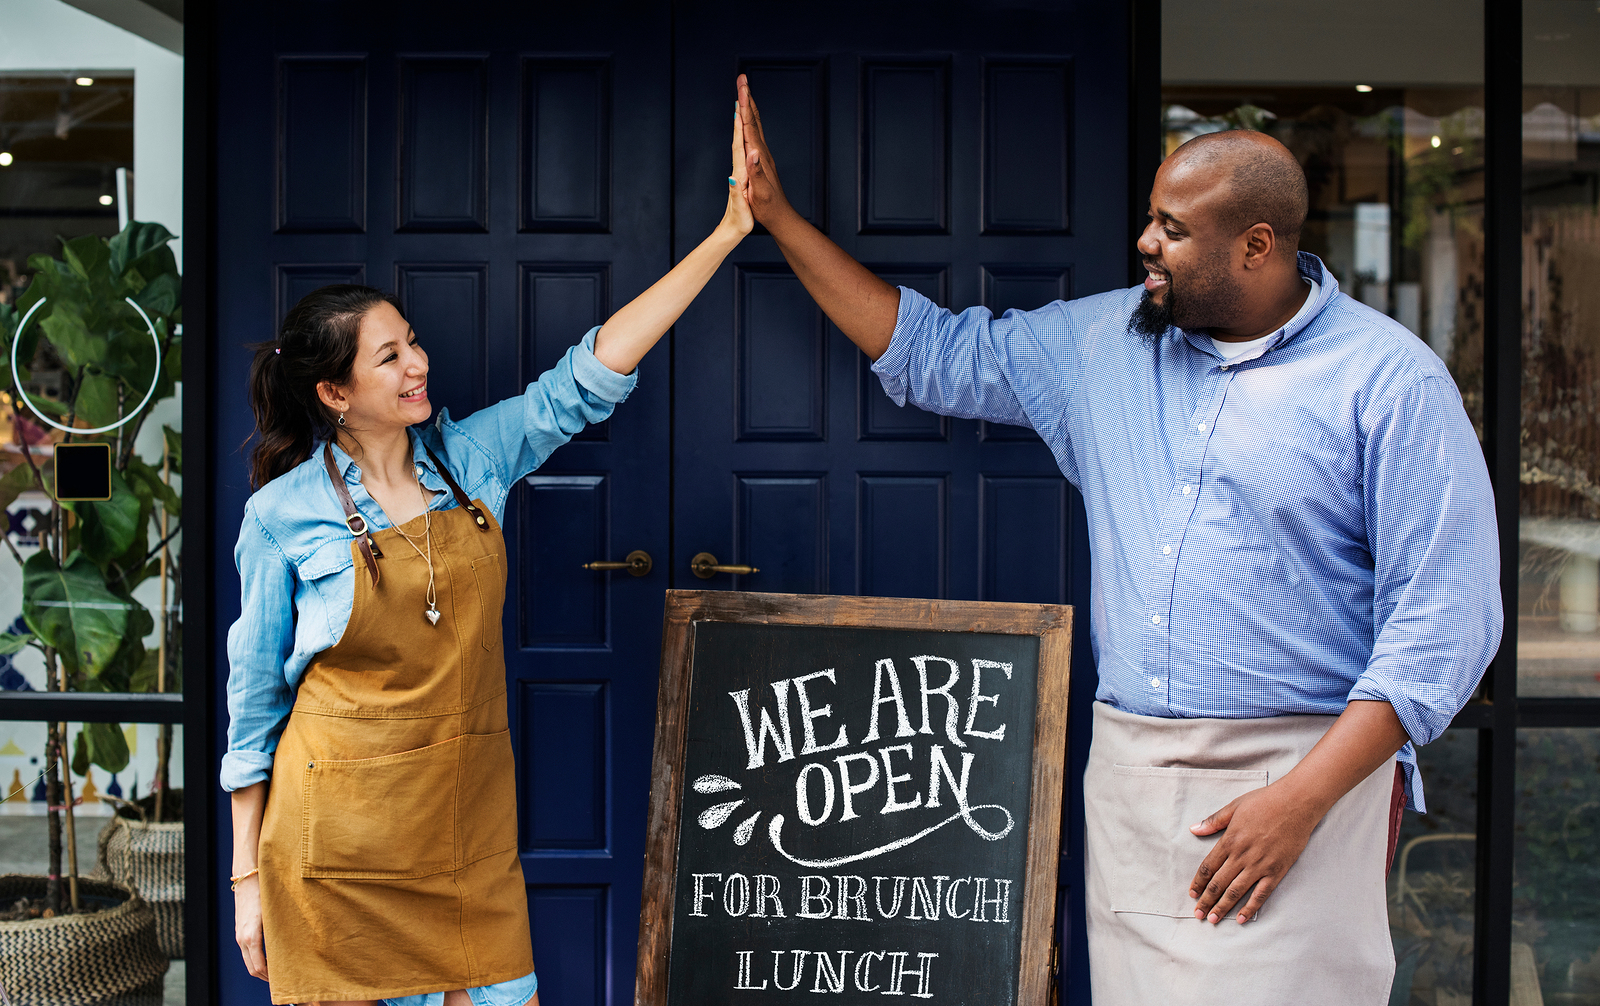 Restaurant owners living their true business ownership